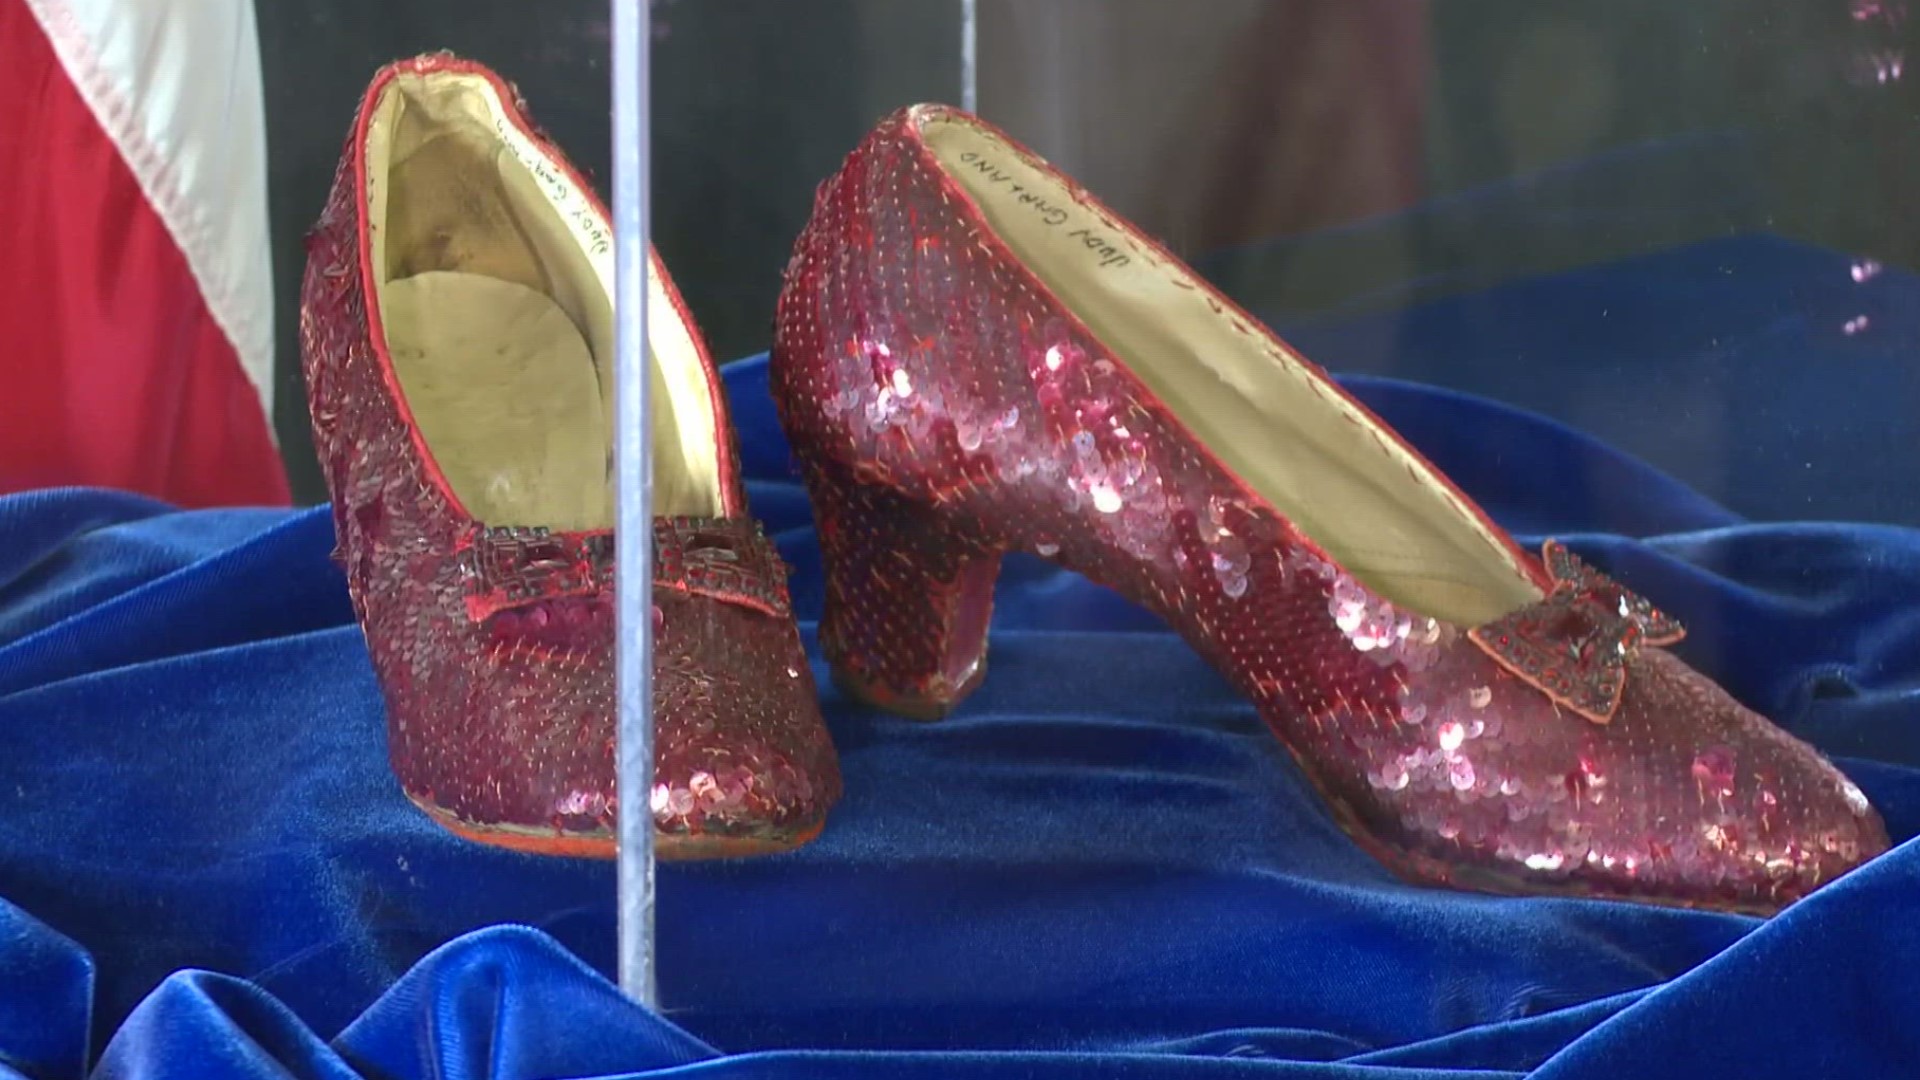 Terry Jon Martin was charged in U.S. District Court in Minnesota with stealing a pair of ruby slippers worn by Judy Garland in the 1939 movie "The Wizard of Oz."